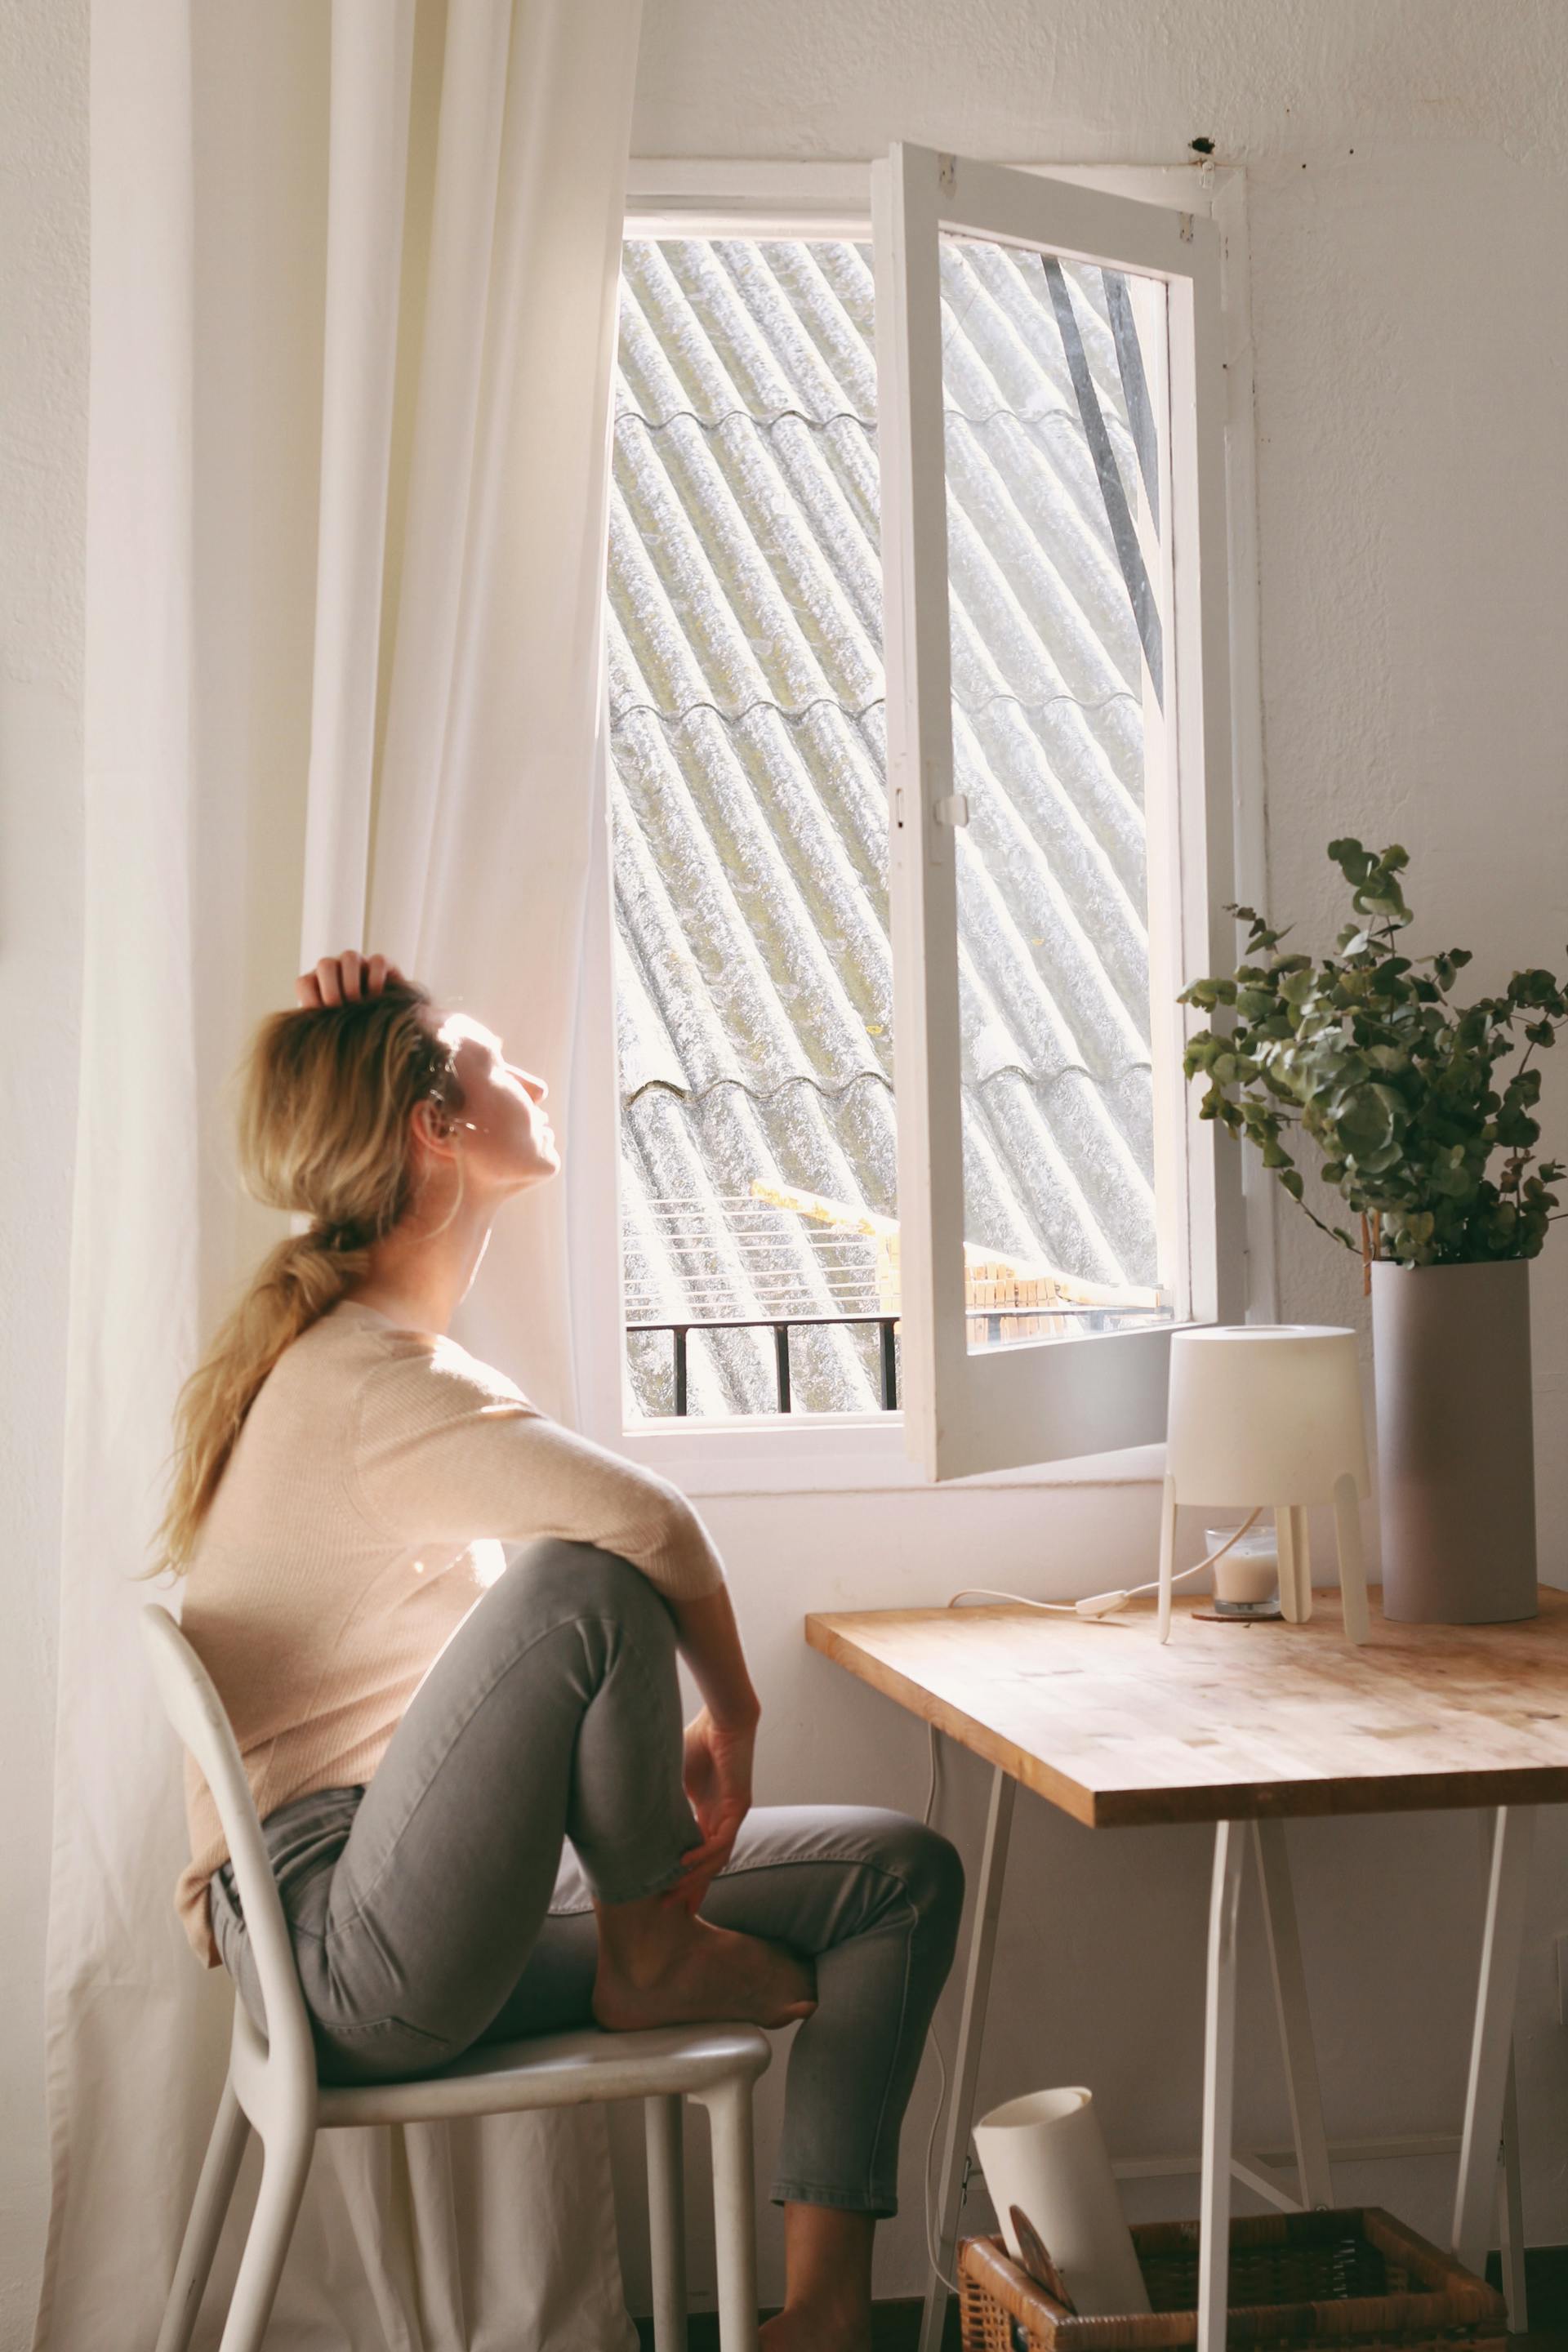 A woman sitting and looking out the window | Source: Pexels